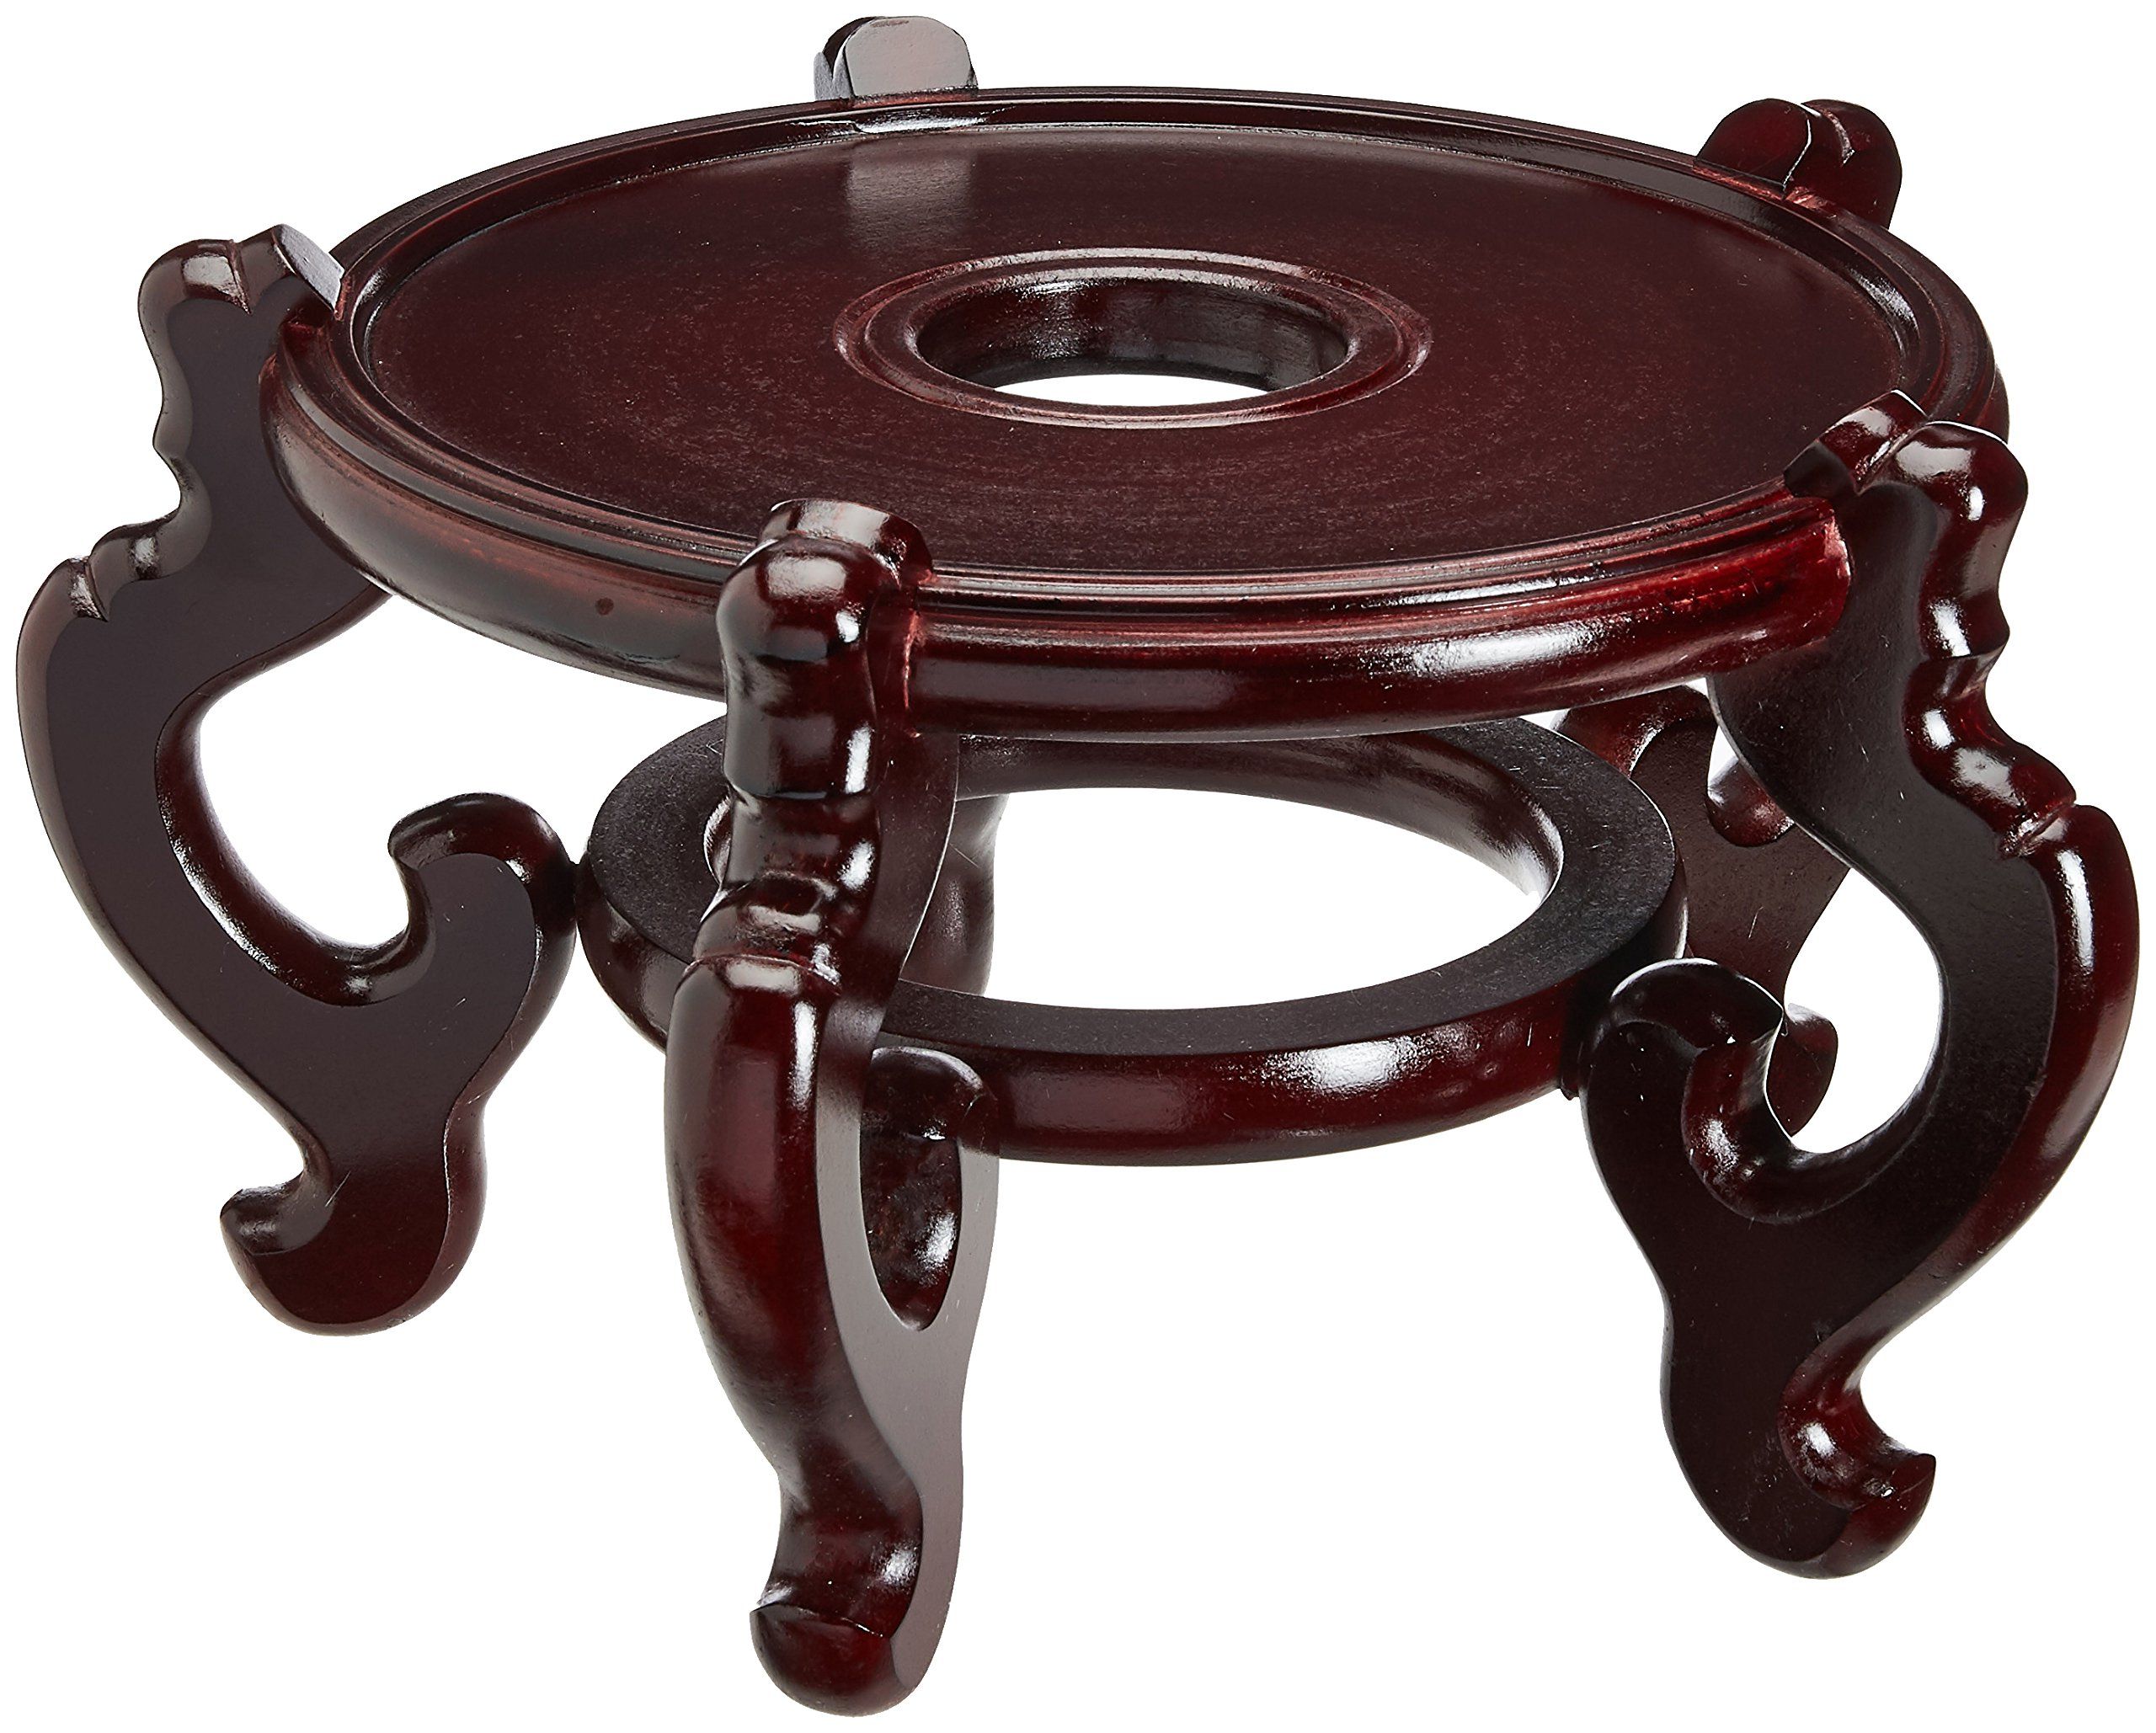 Popular Amazon: Oriental Furniture Rosewood Fishbowl Stand – Size 10.5 In (View 2 of 10)